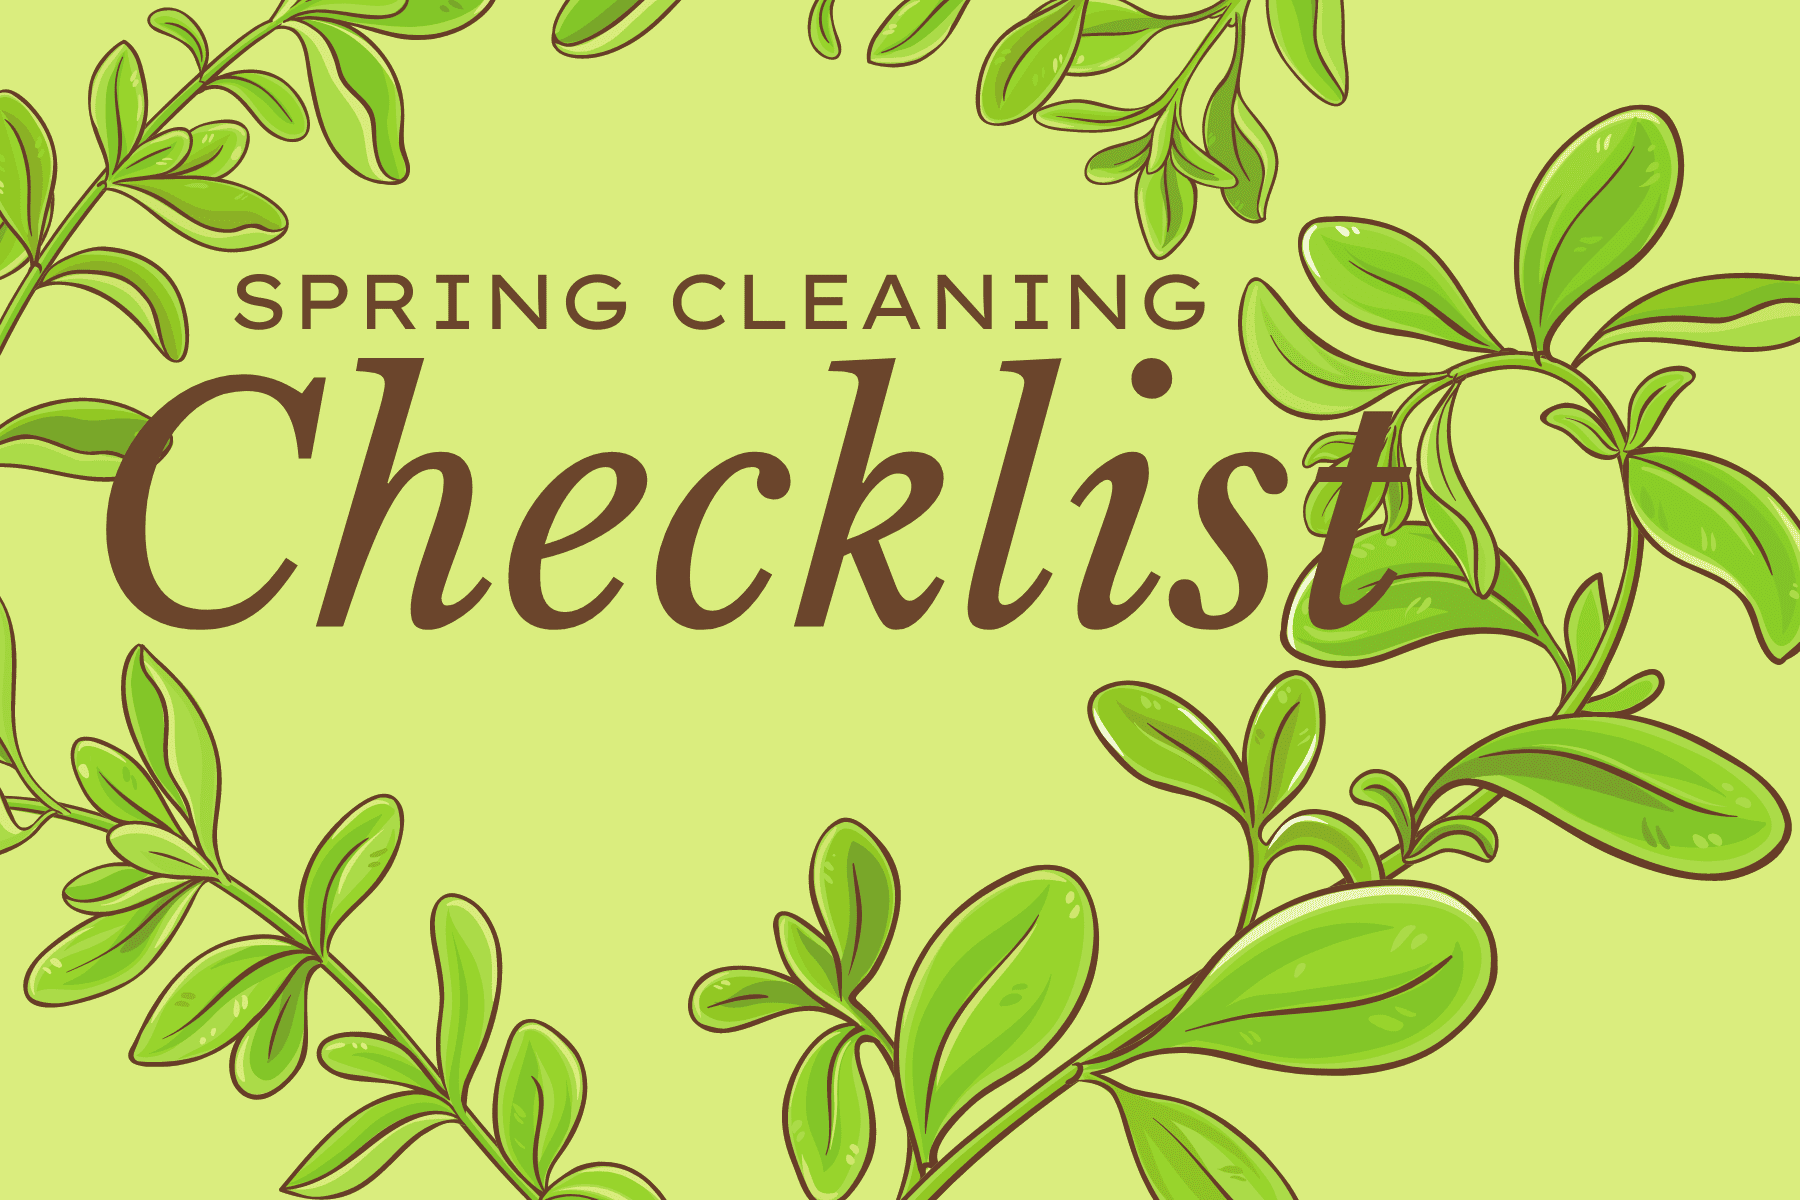 Spring Cleaning Checklist on light green background with botanical accents